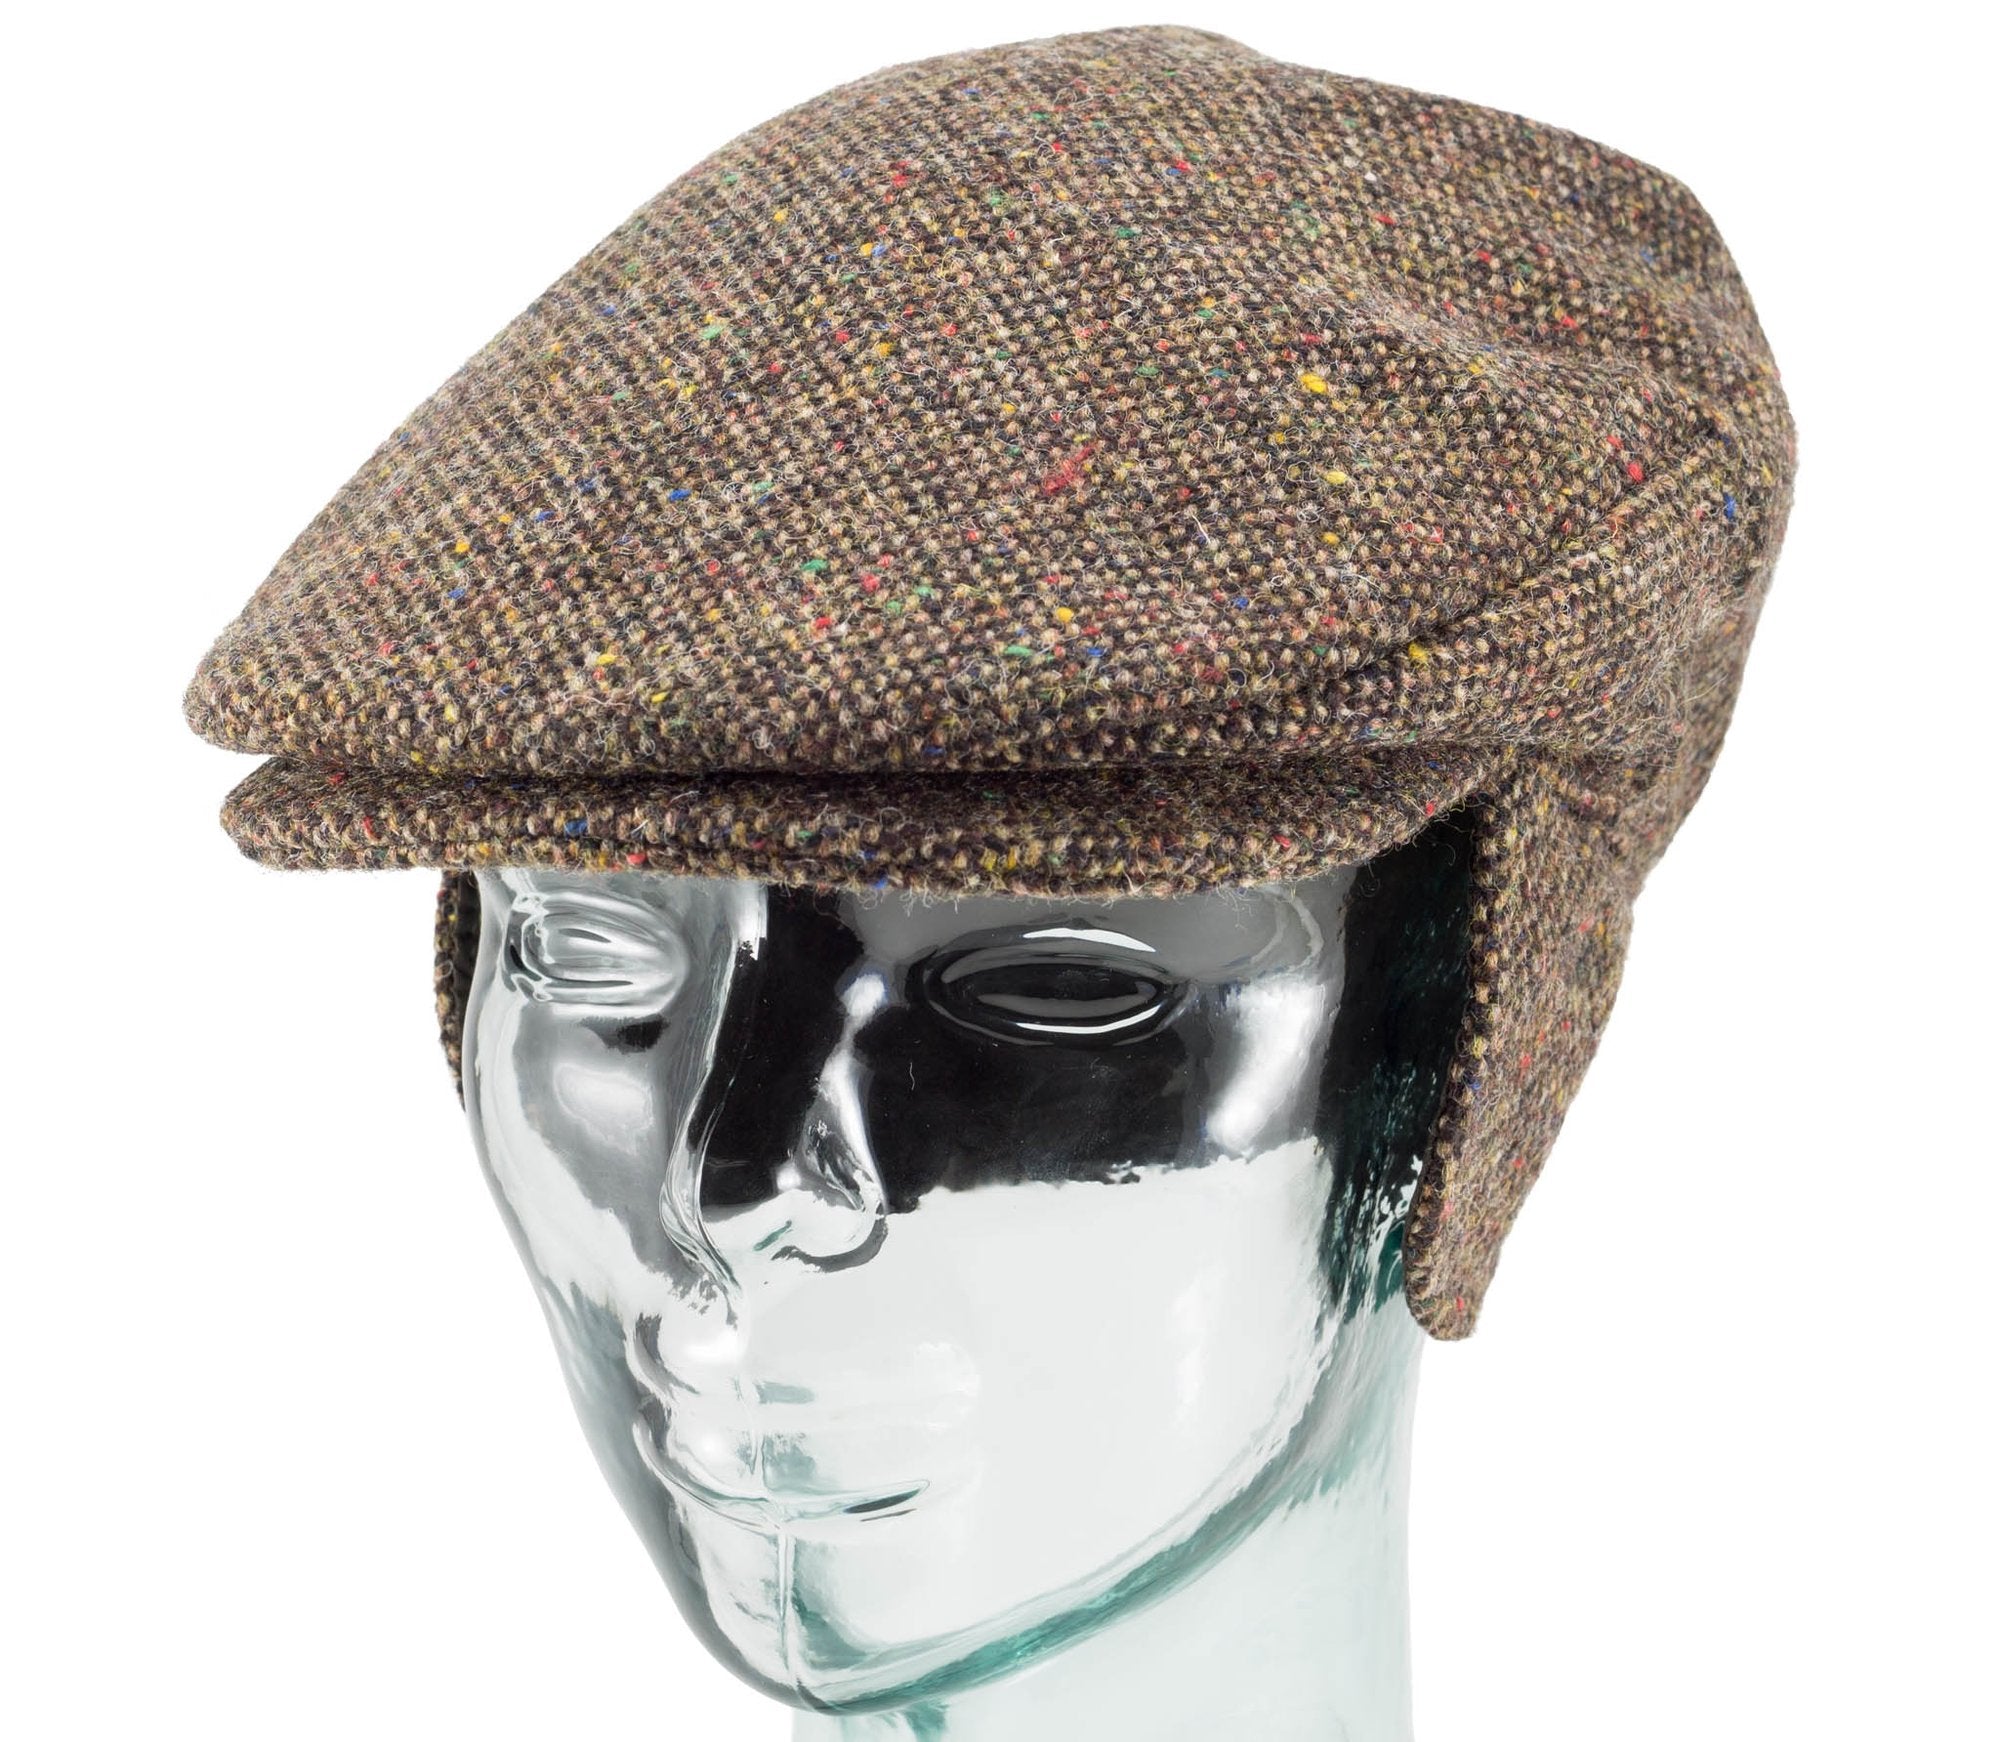 Vintage Style Cap with Earflaps